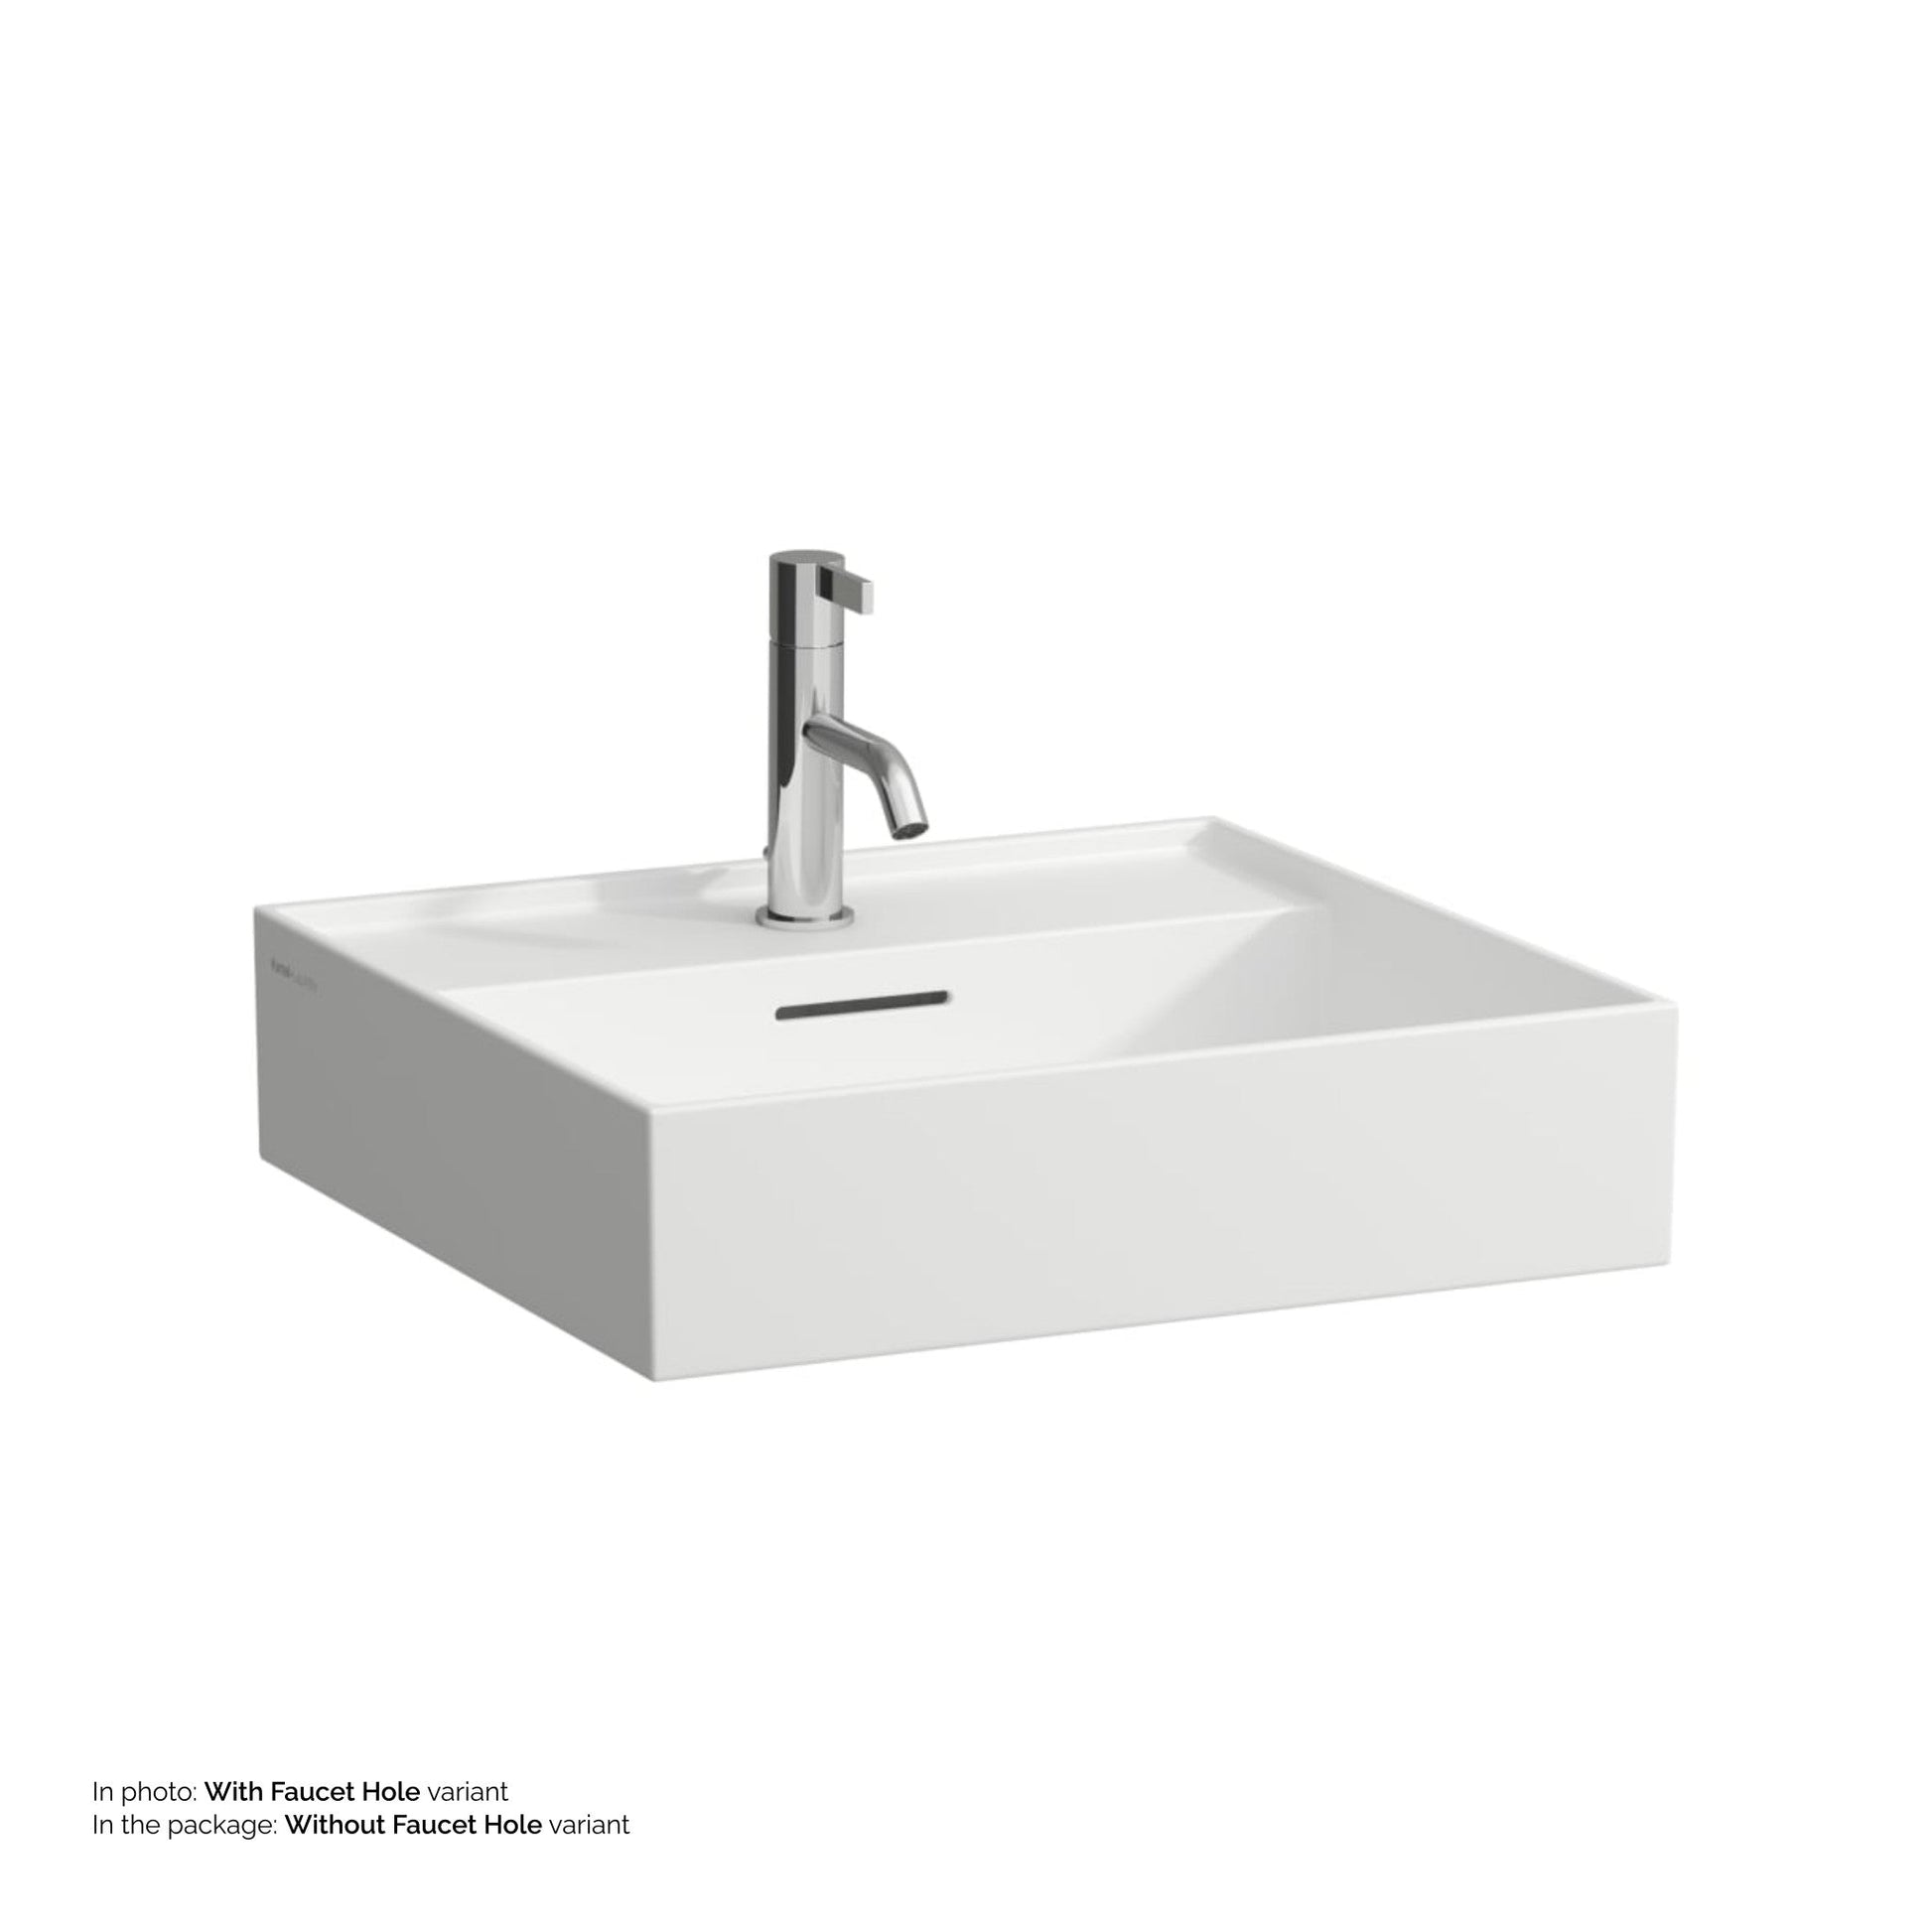 Laufen Kartell 20" x 18" Matte White Countertop Bathroom Sink Without Faucet Hole